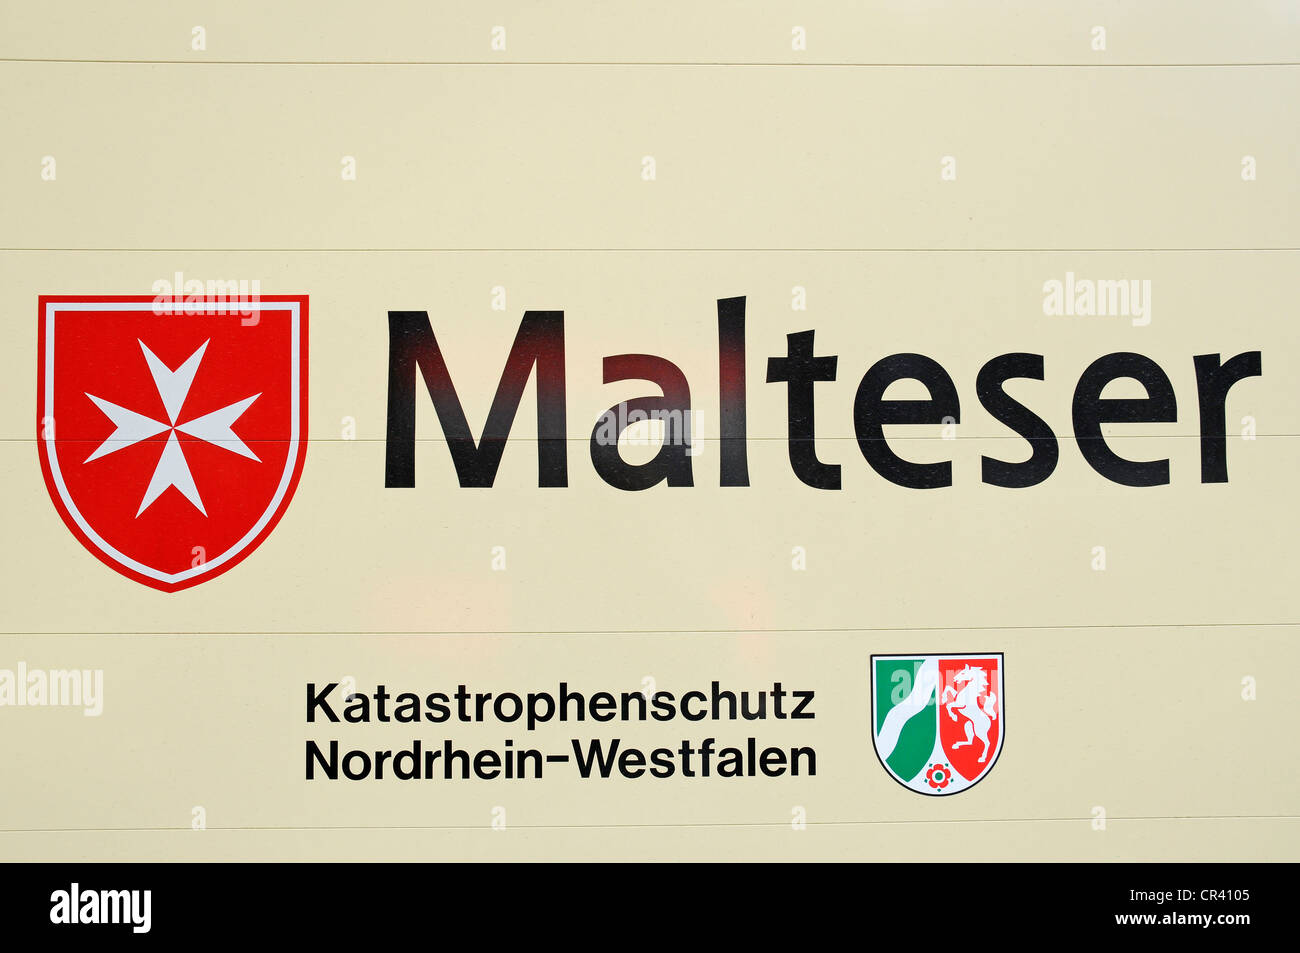 Malteser Hilfsdienst emergency service, logo, ambulance, civil protection and disaster control, Germany, Europe, PublicGround Stock Photo